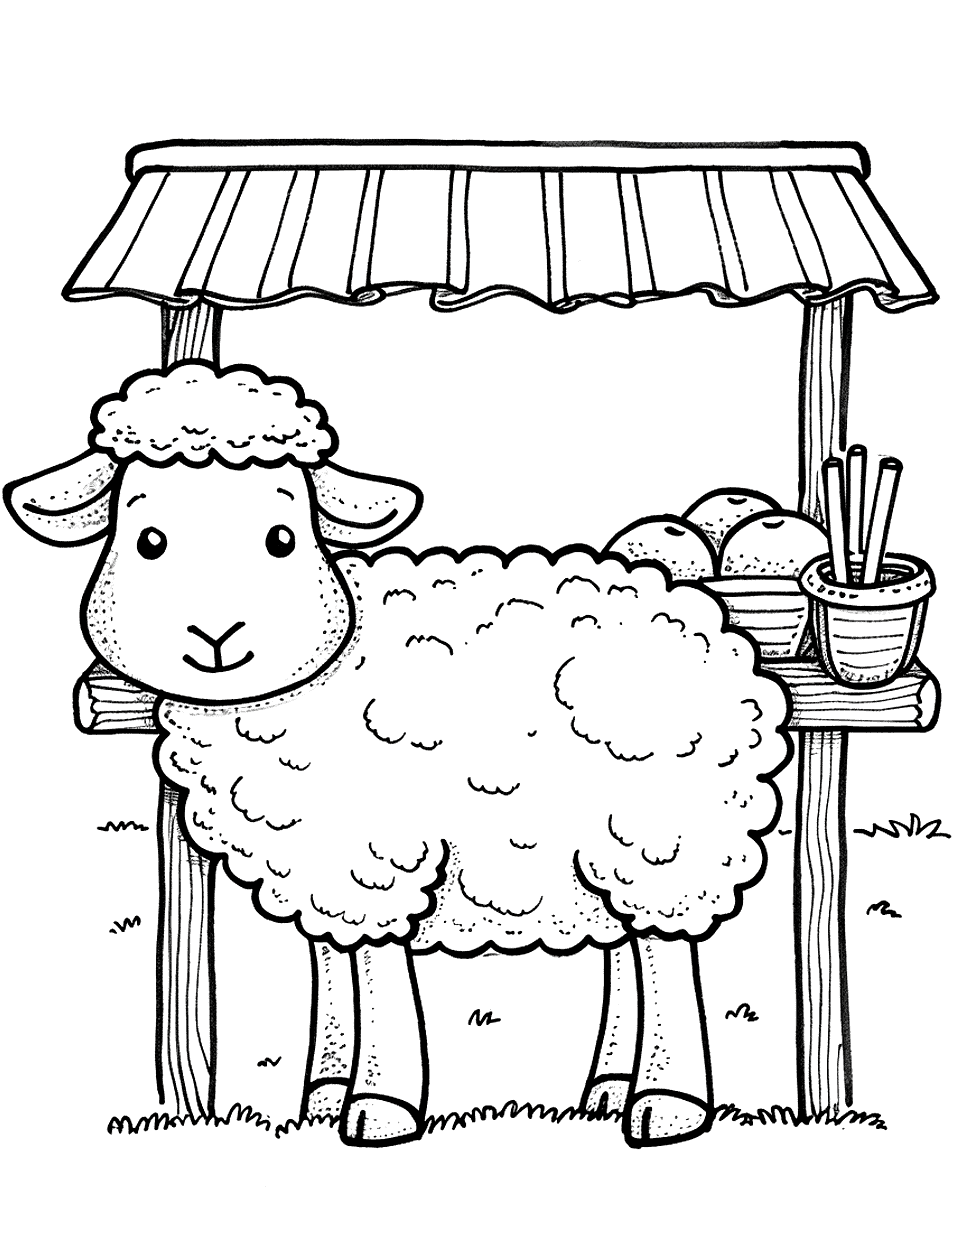 Sheep at a Lemonade Stand Coloring Page - A sheep standing behind a homemade lemonade stand in the summer.